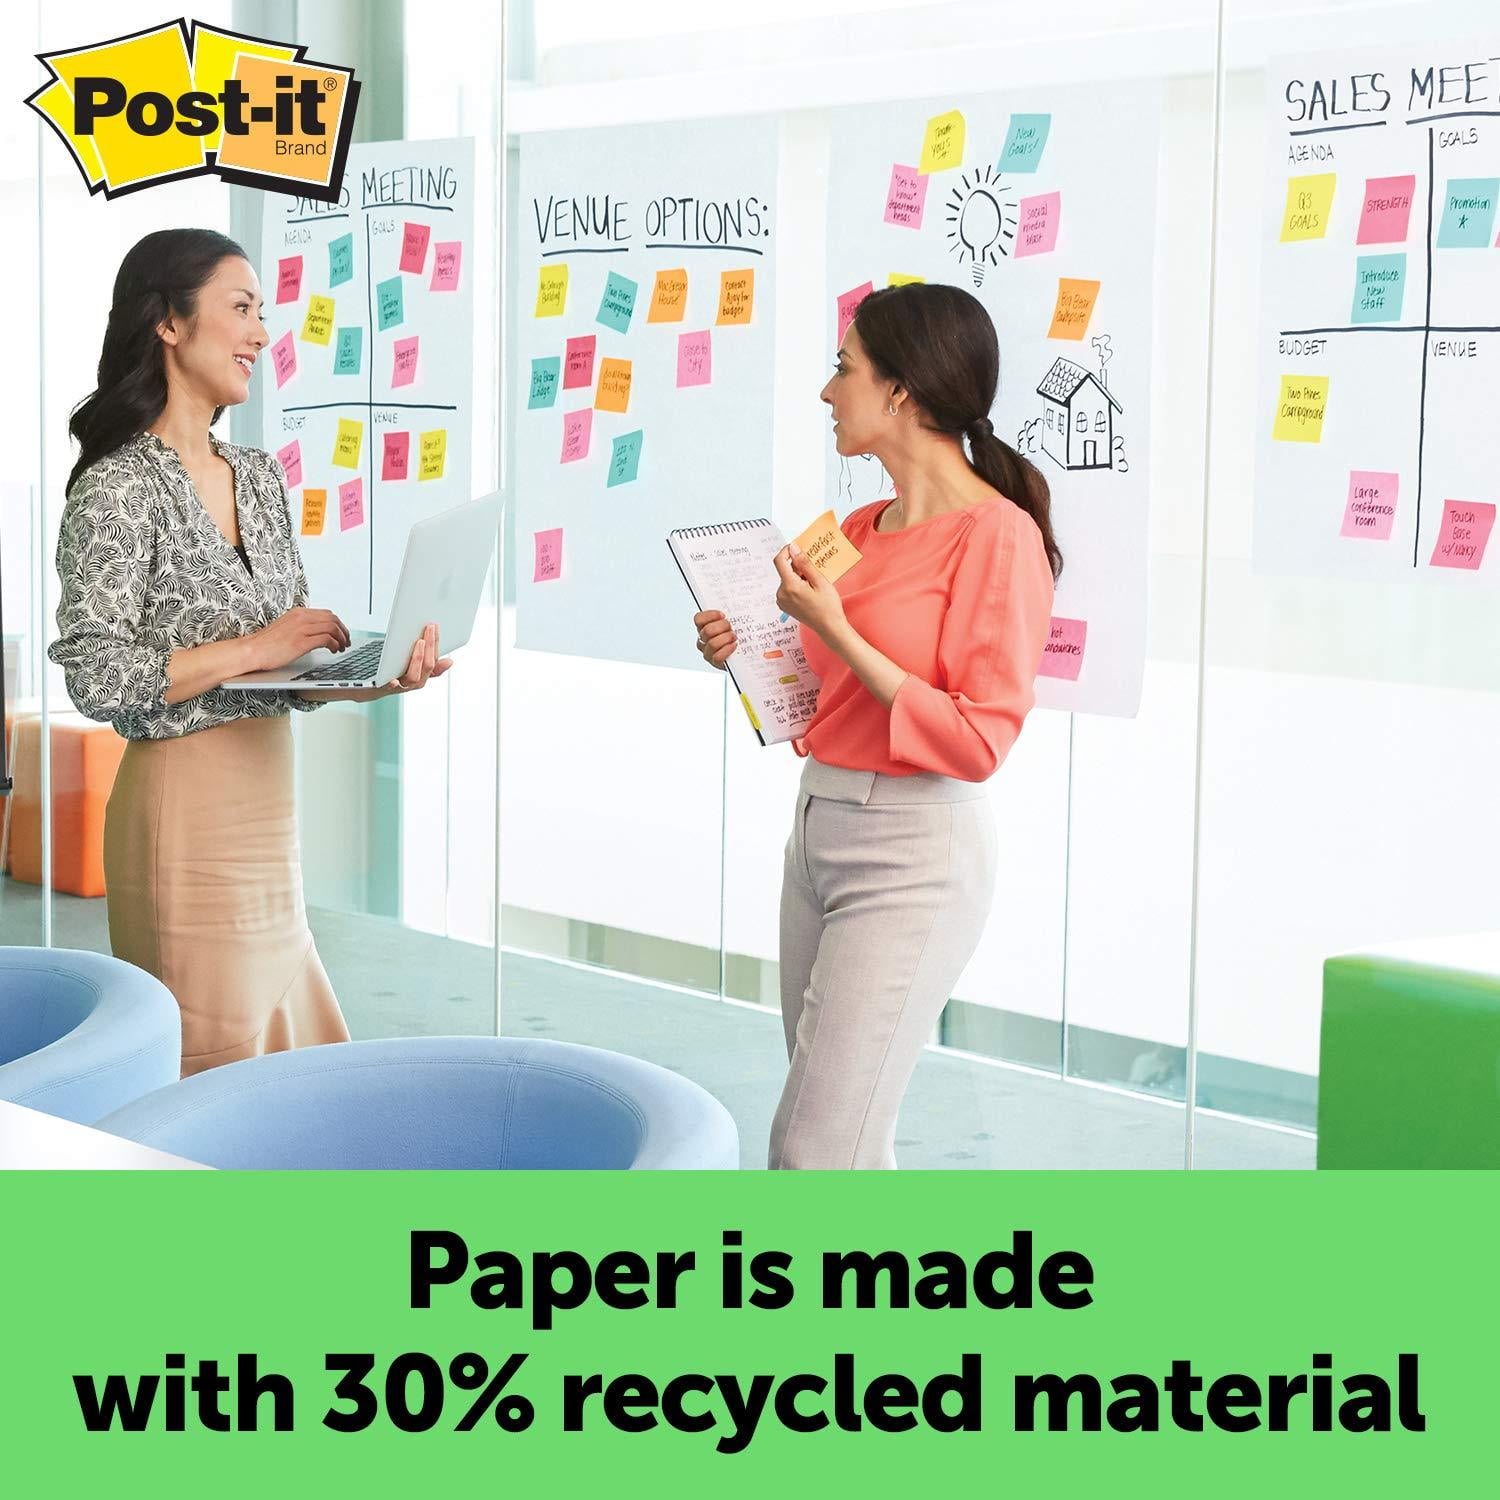  Post-it Super Sticky Easel Pad, 25 x 30 Inches, 30 Sheets/Pad,  6 Pads, Large White Premium Self Stick Flip Chart Paper, Super Sticking  Power (559VAD6PK) : Office Products